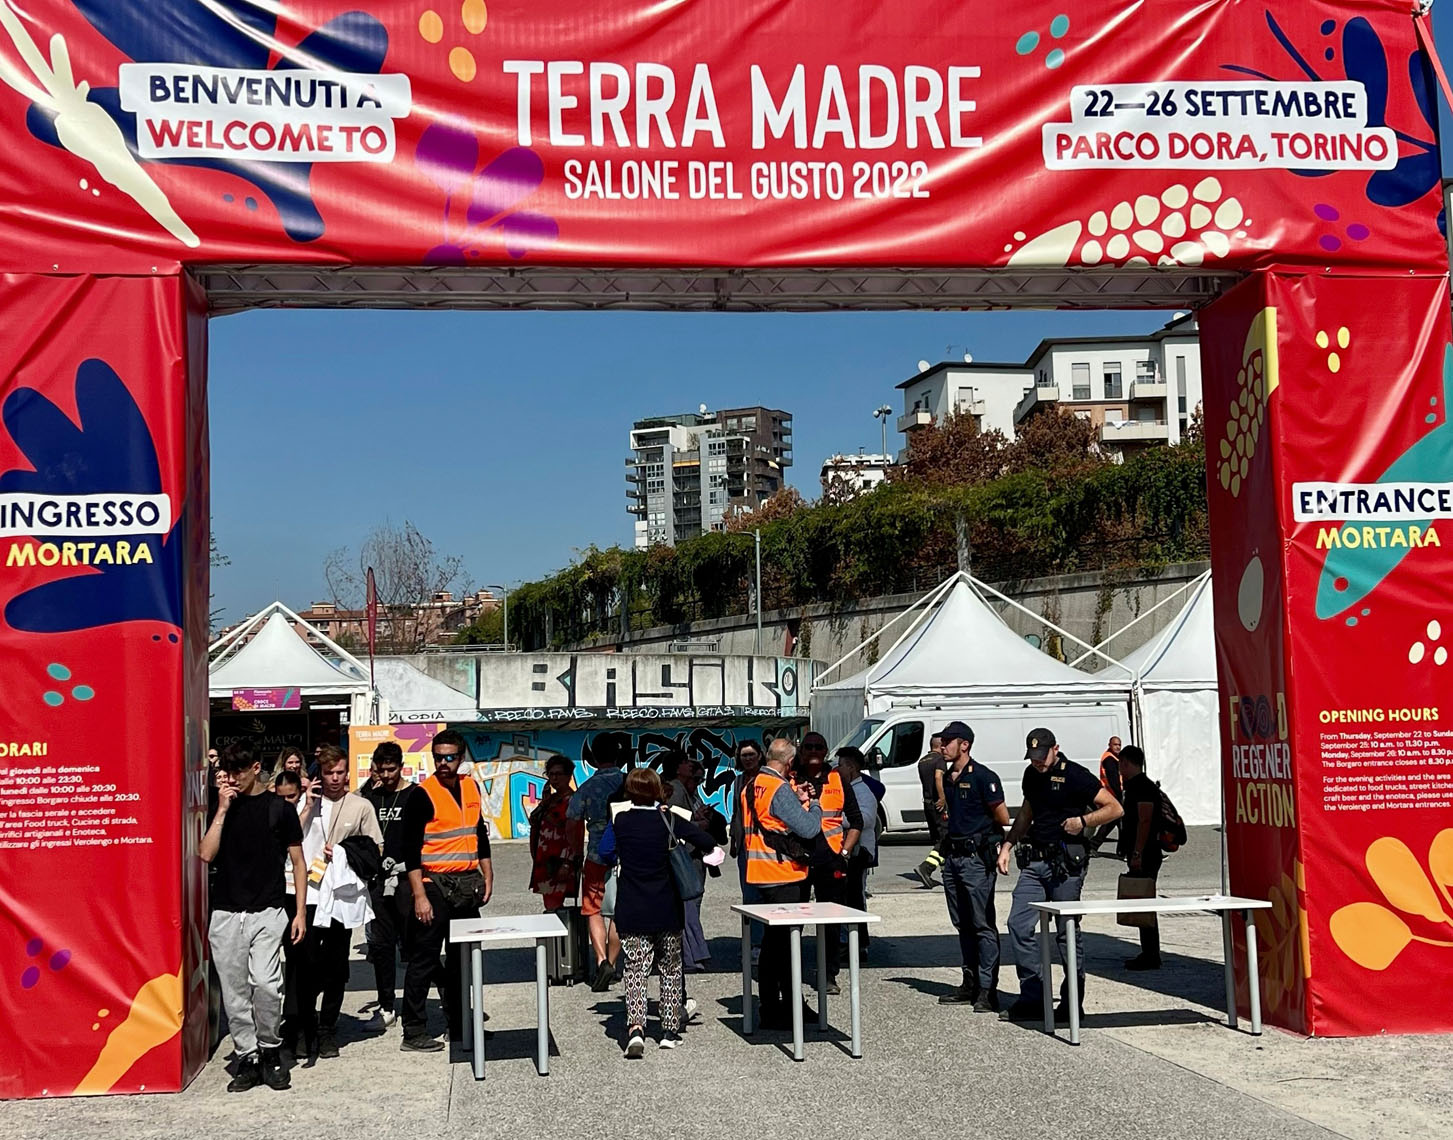 Terra Madre Entrance, Parco Dora, Turin.  Terra Madre is a gathering of the Slow Food community from all over the world. Held every two years in Turin, Italy, delegates are selected to represent their country at Terra Madre. More than 3000 representatives of the Slow Food network from 130 countries attended the event held September 22-26th, 2022